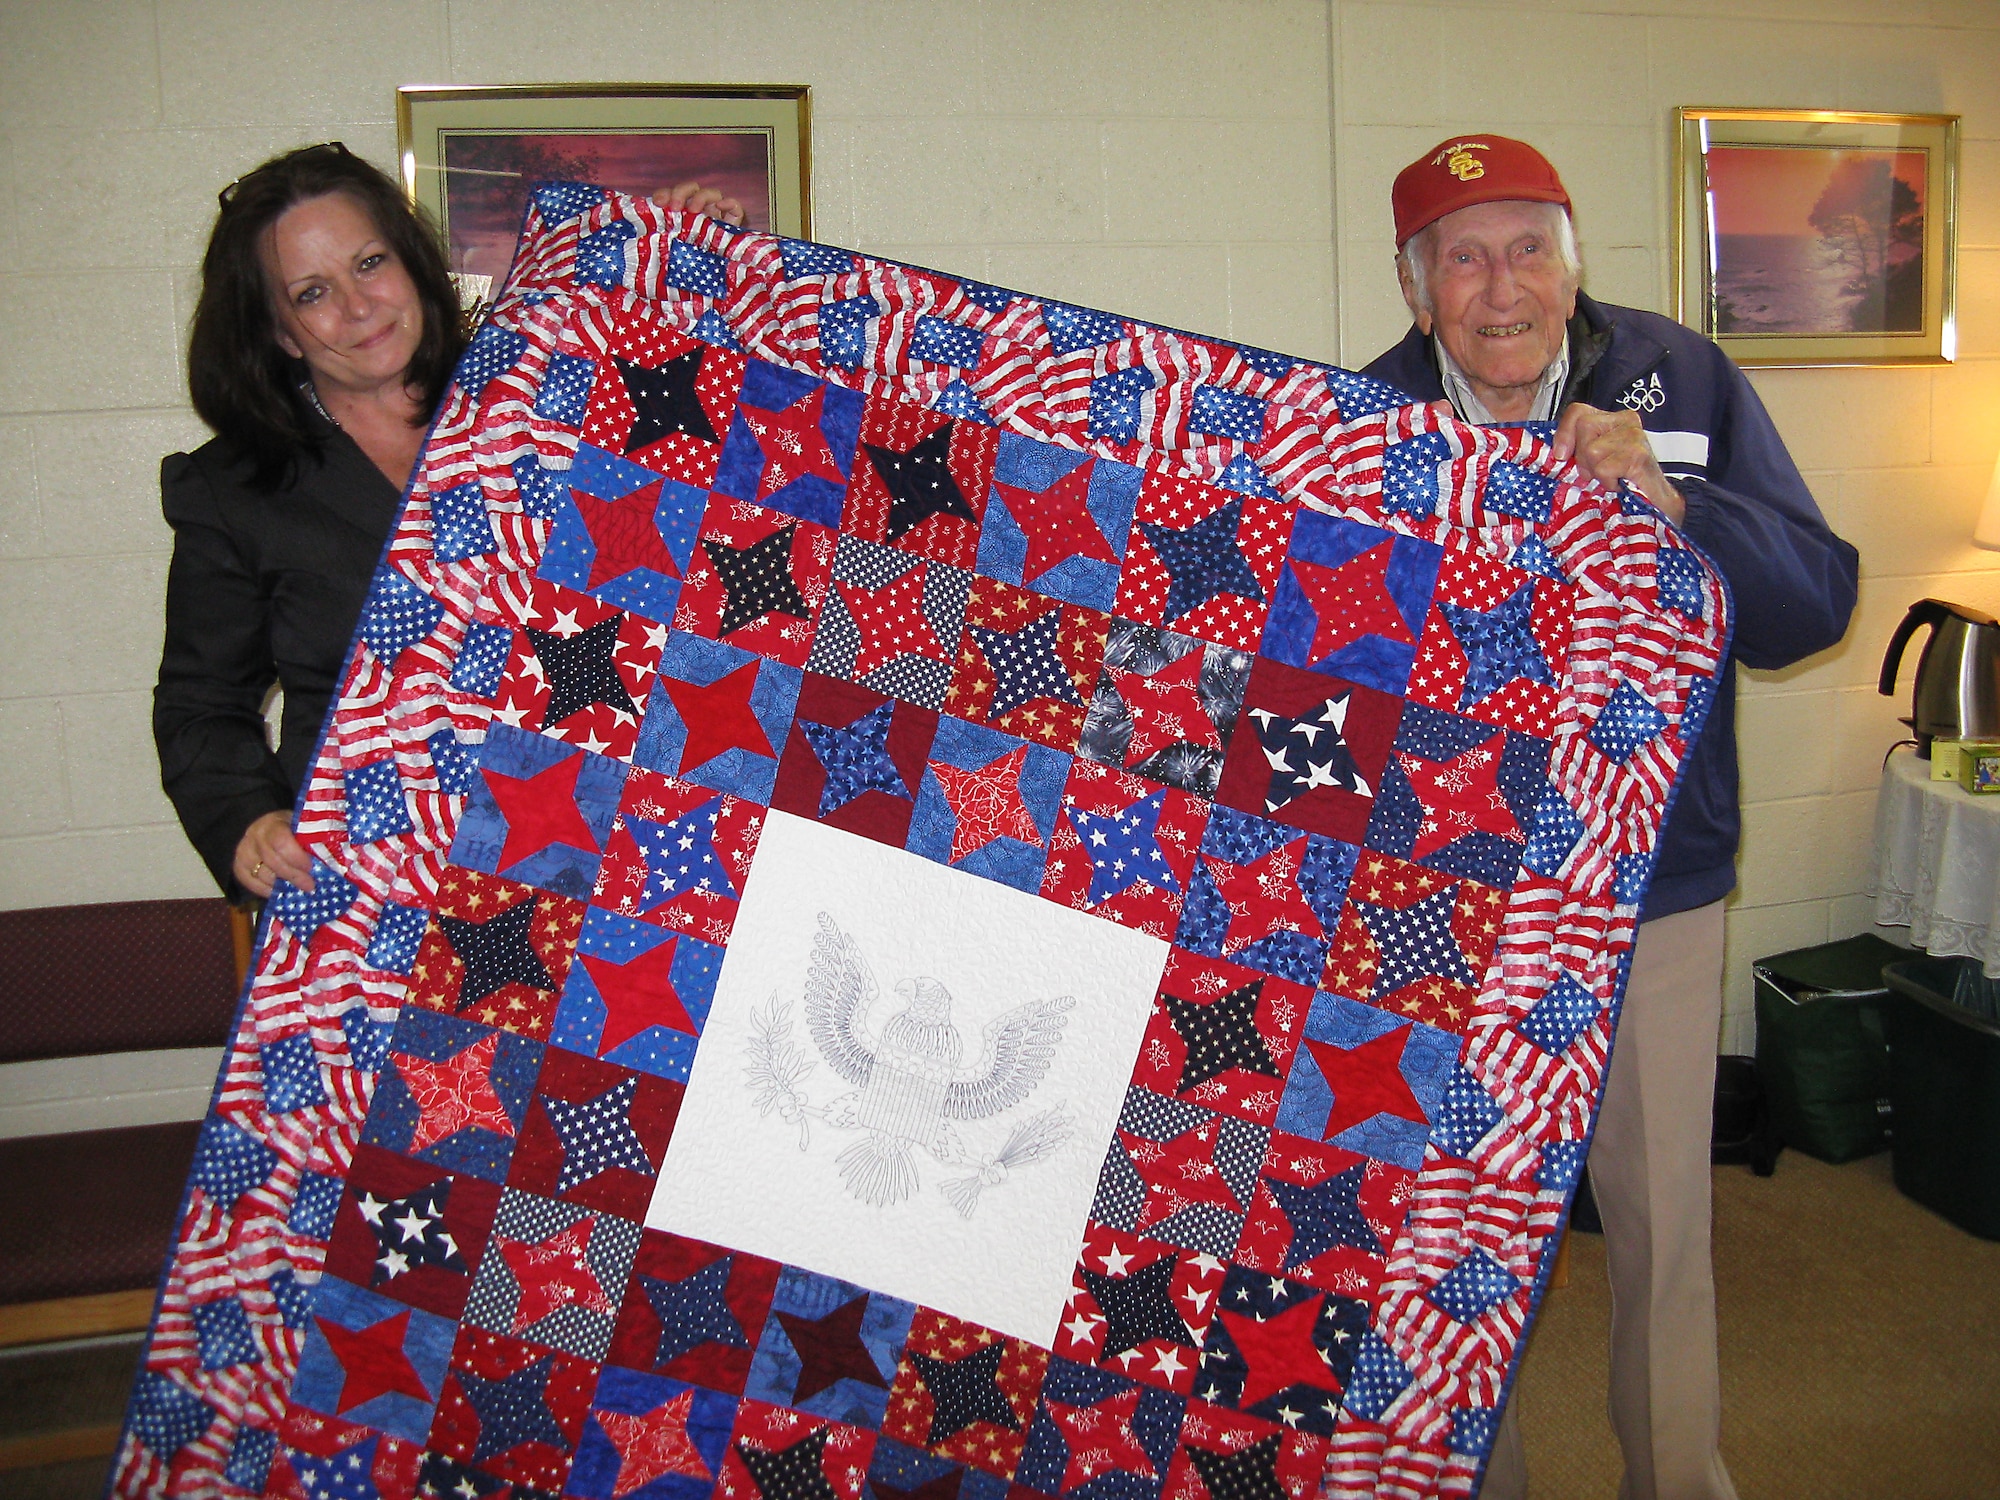 Janice Laurenti, Air Force Test Center Contracting Directorate contracts specialist and Quilts of Valor Foundation Southern California regional coordinator, presents Louis Zamperini with a quilt following his appearance at the Base Theater. (Courtesy photo by Col. Christopher Azzano)